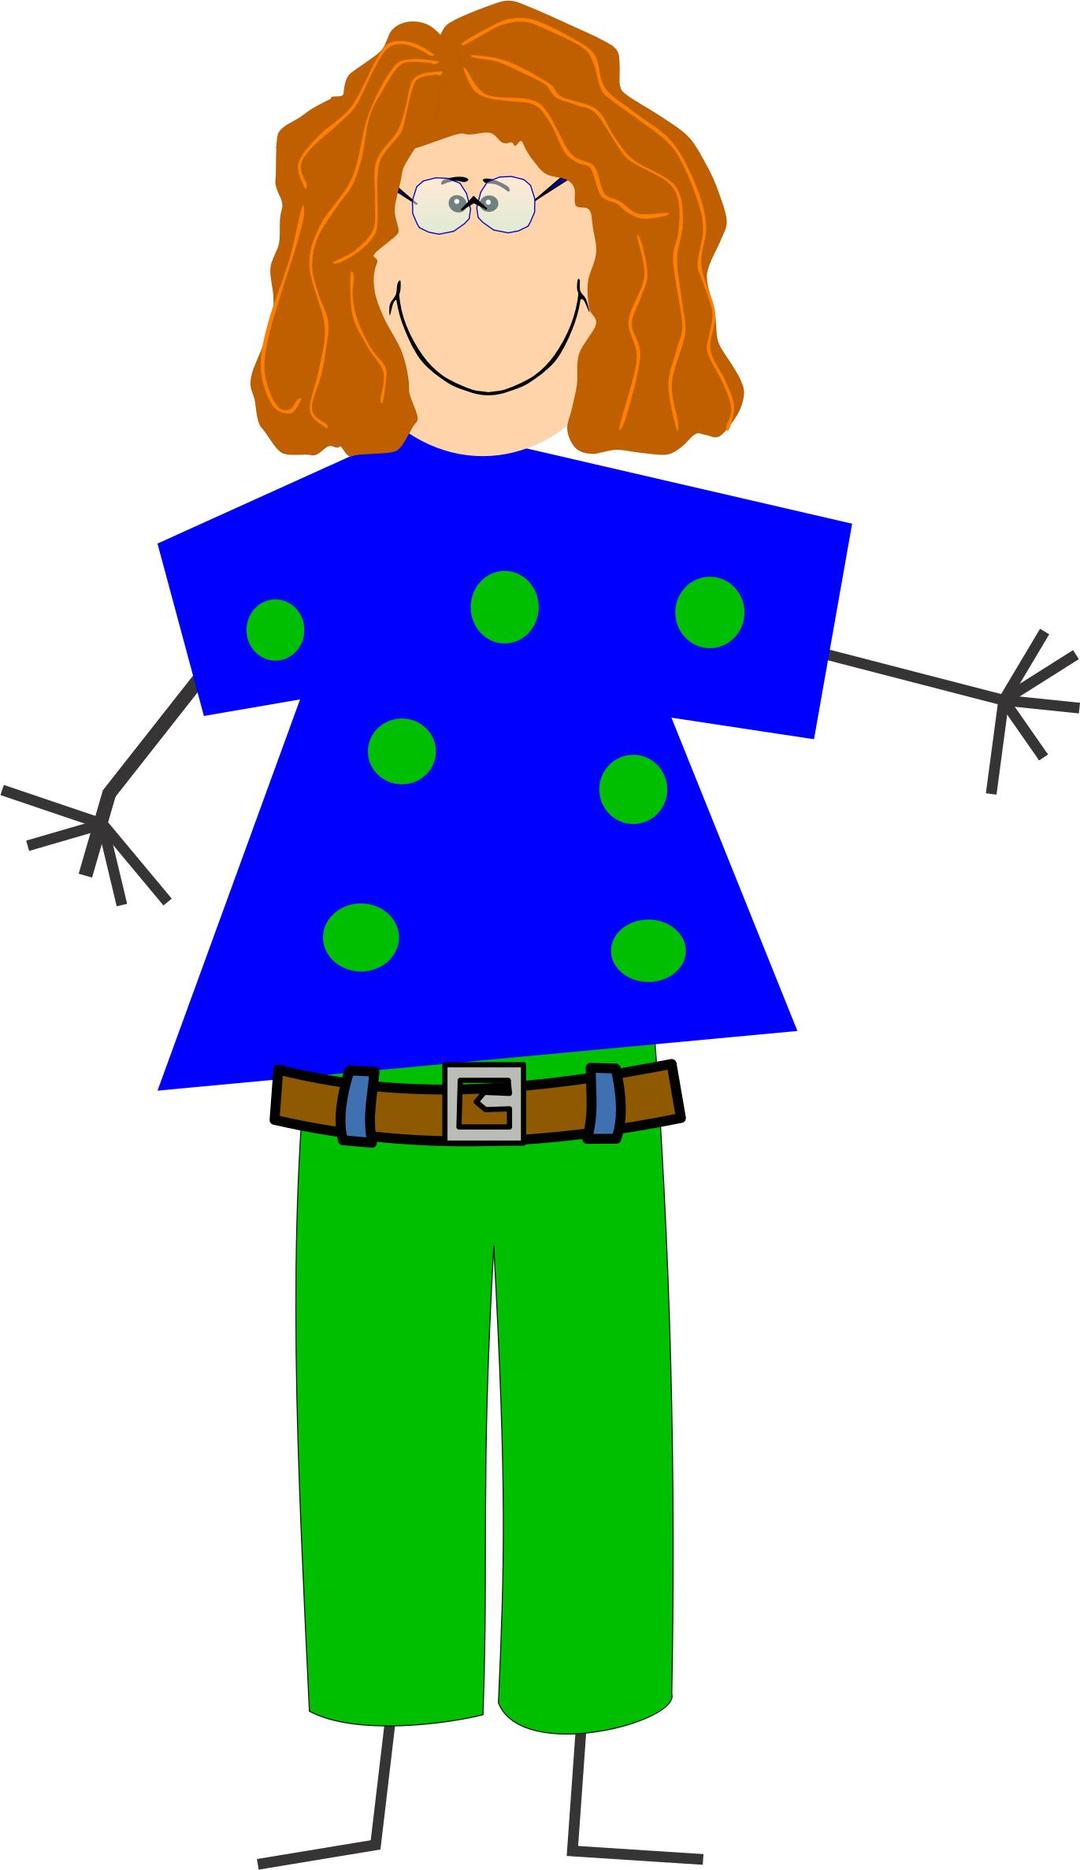 Grandma with glasses and ginger hair and funny clothes png transparent